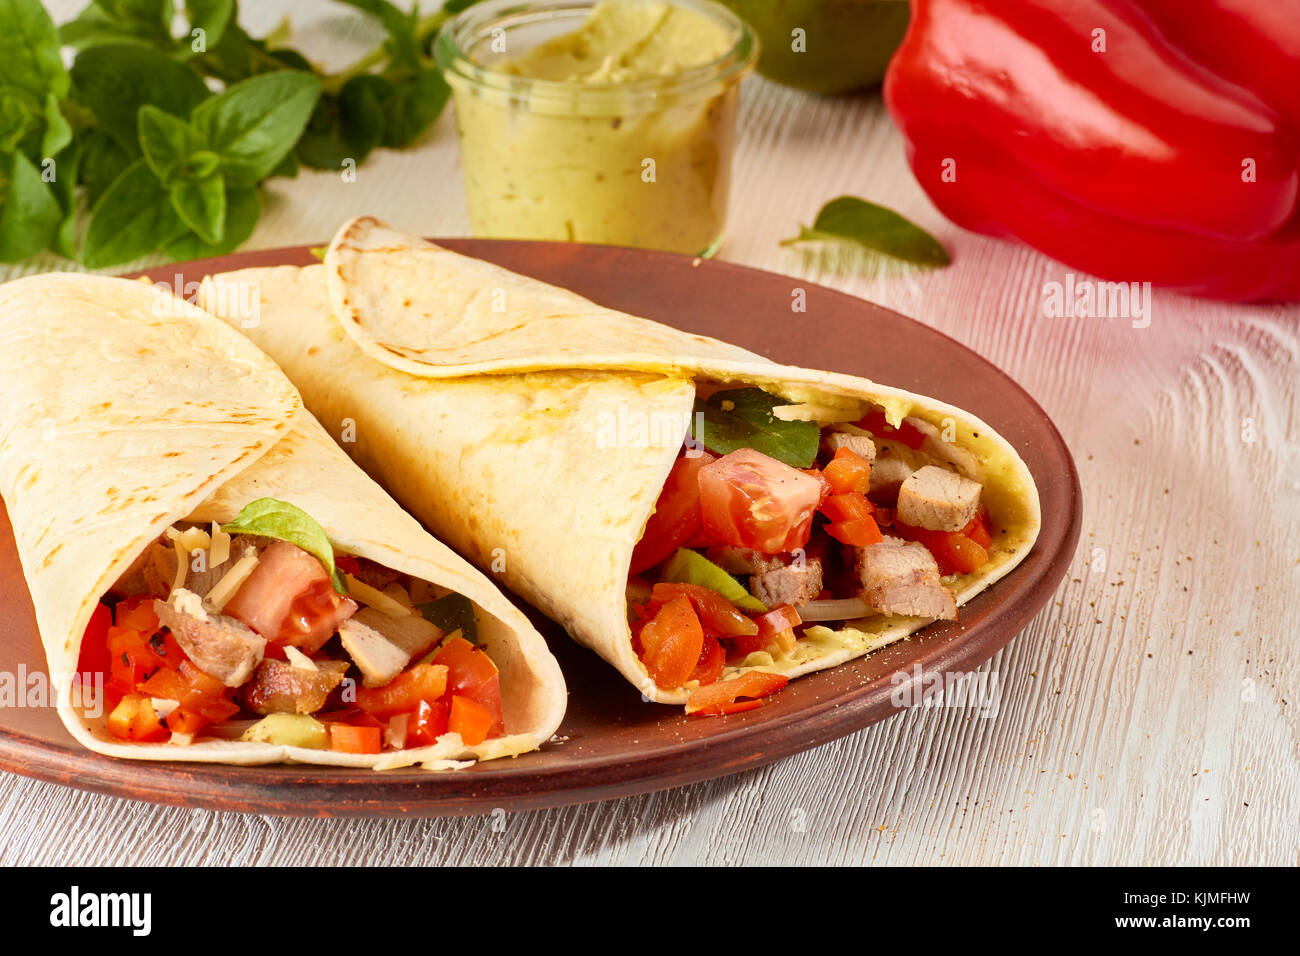 Two tortilla wraps with roasted turkey and vegetables Stock Photo